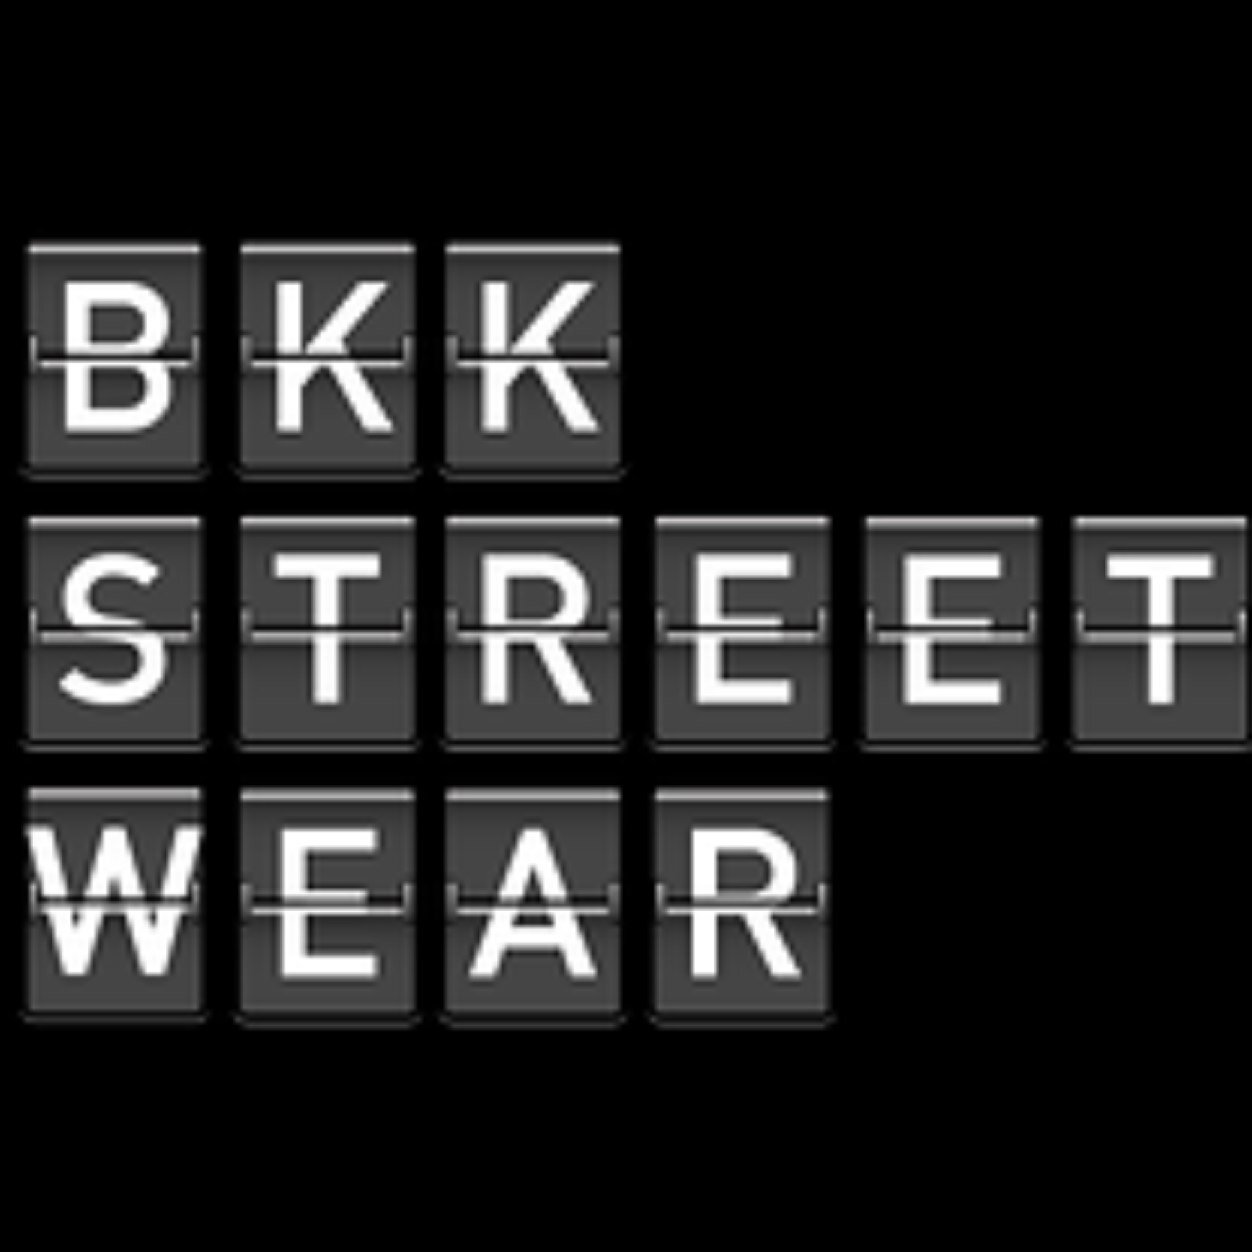 We manufacture all types of fashion clothes & accessories! Send your enquires to sales@bkkstreetwear.com โทร. +66871260002